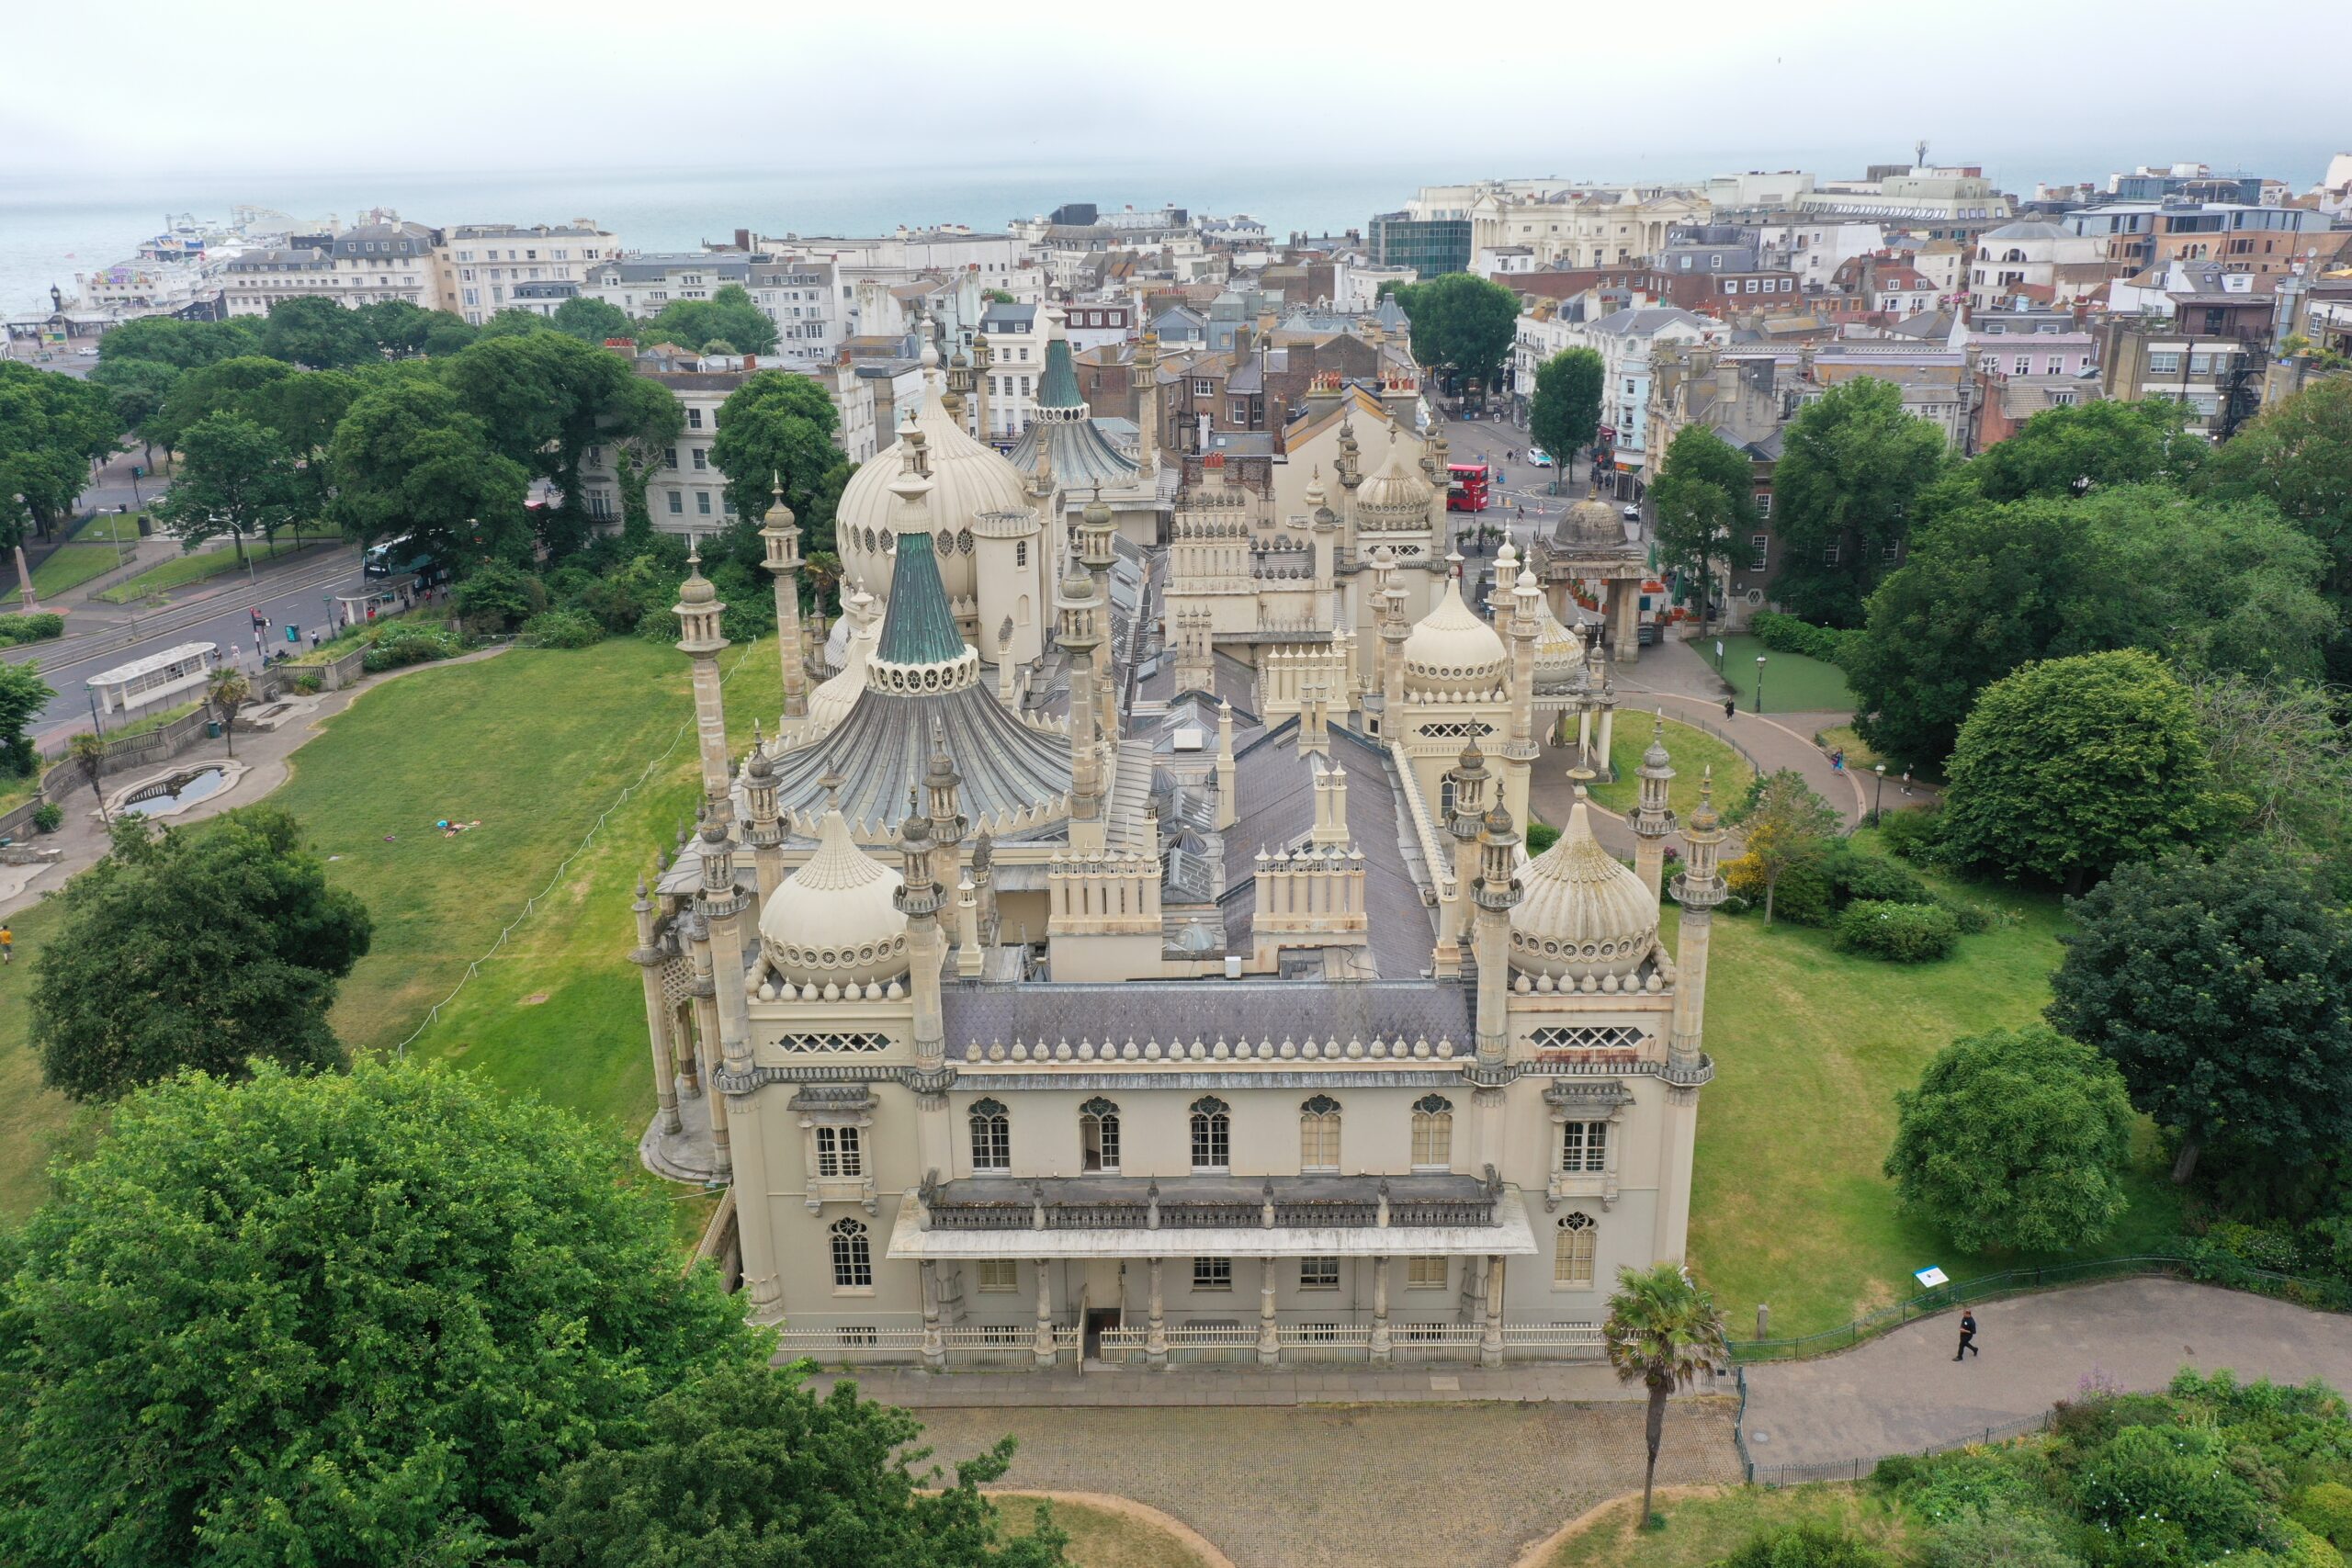 Drone image of the Royal Pavilion